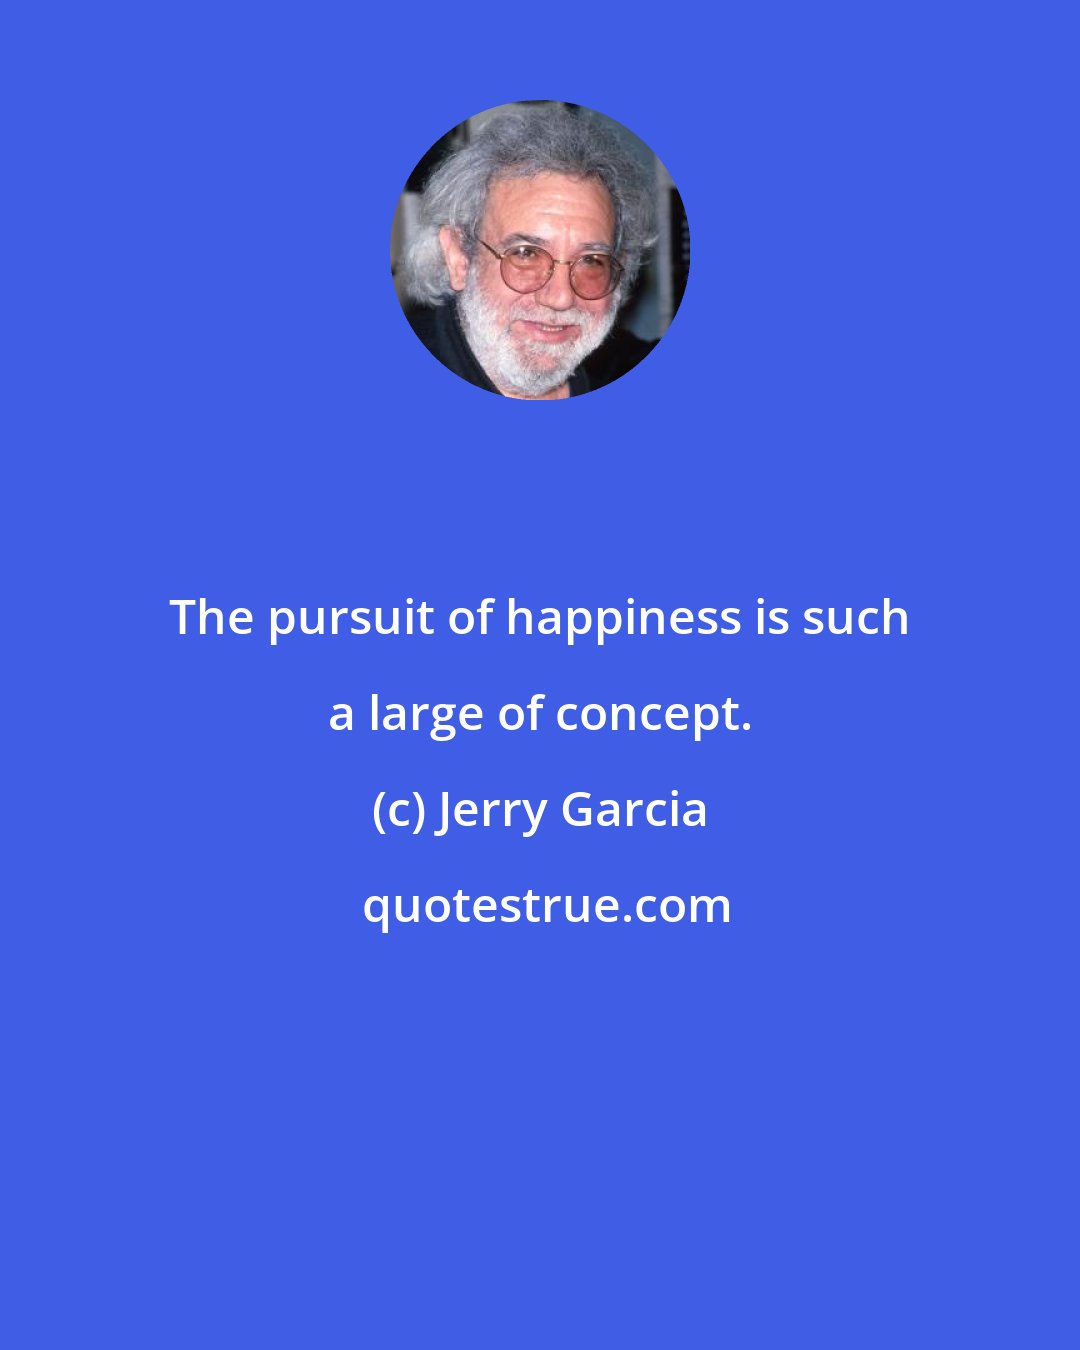 Jerry Garcia: The pursuit of happiness is such a large of concept.